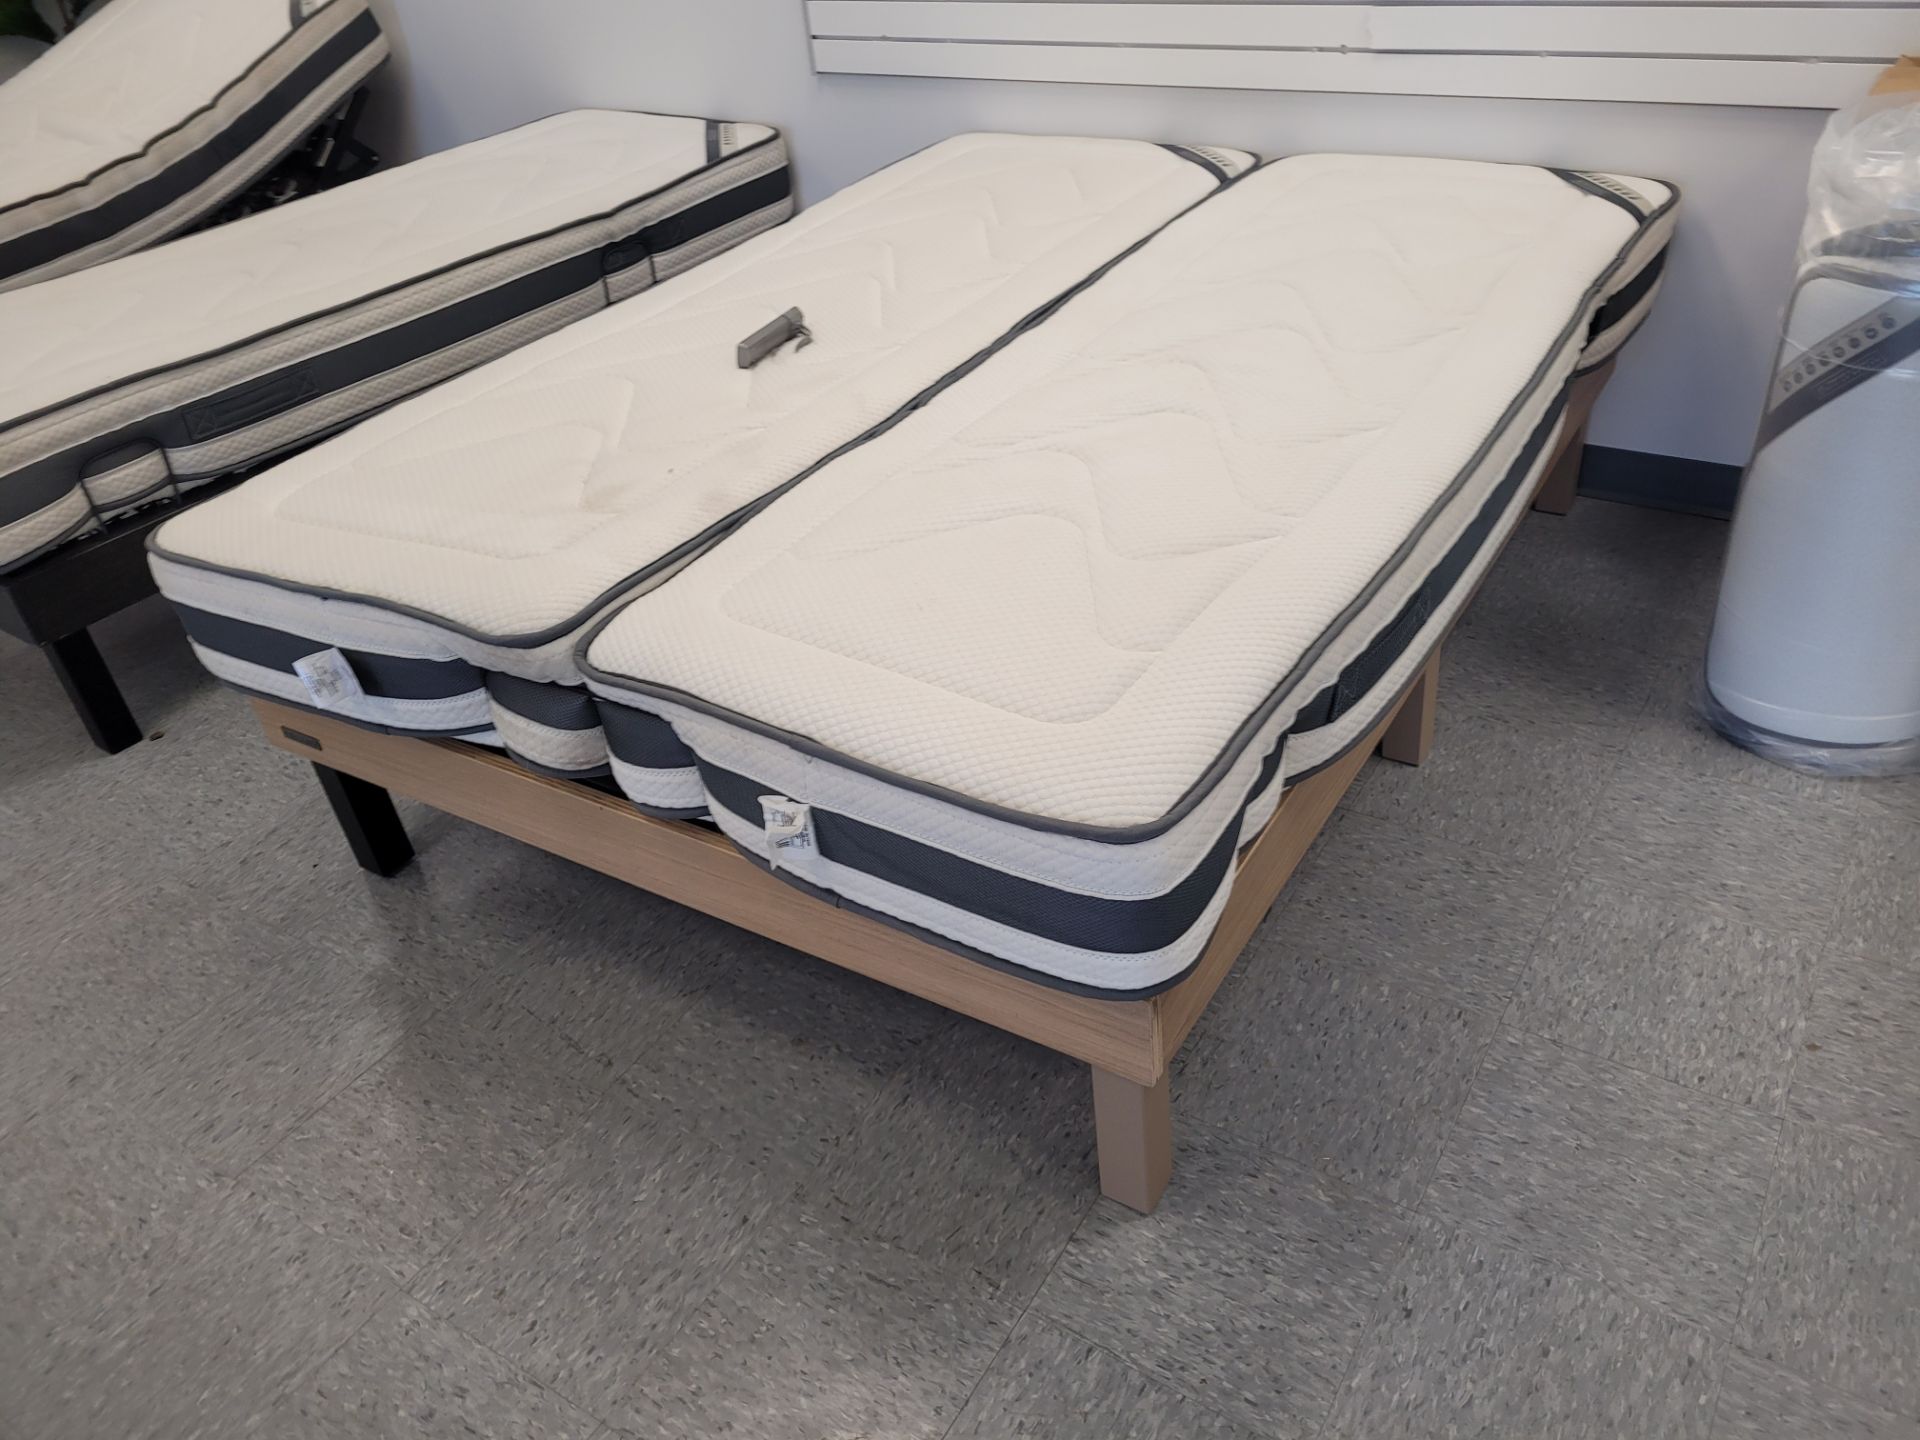 NATURE & PUR Memory Foam Mattress mod. ROYAL LUXE V2, size: 1/2 Queen, 30" x 79.5", hypoallergenic, - Image 4 of 4